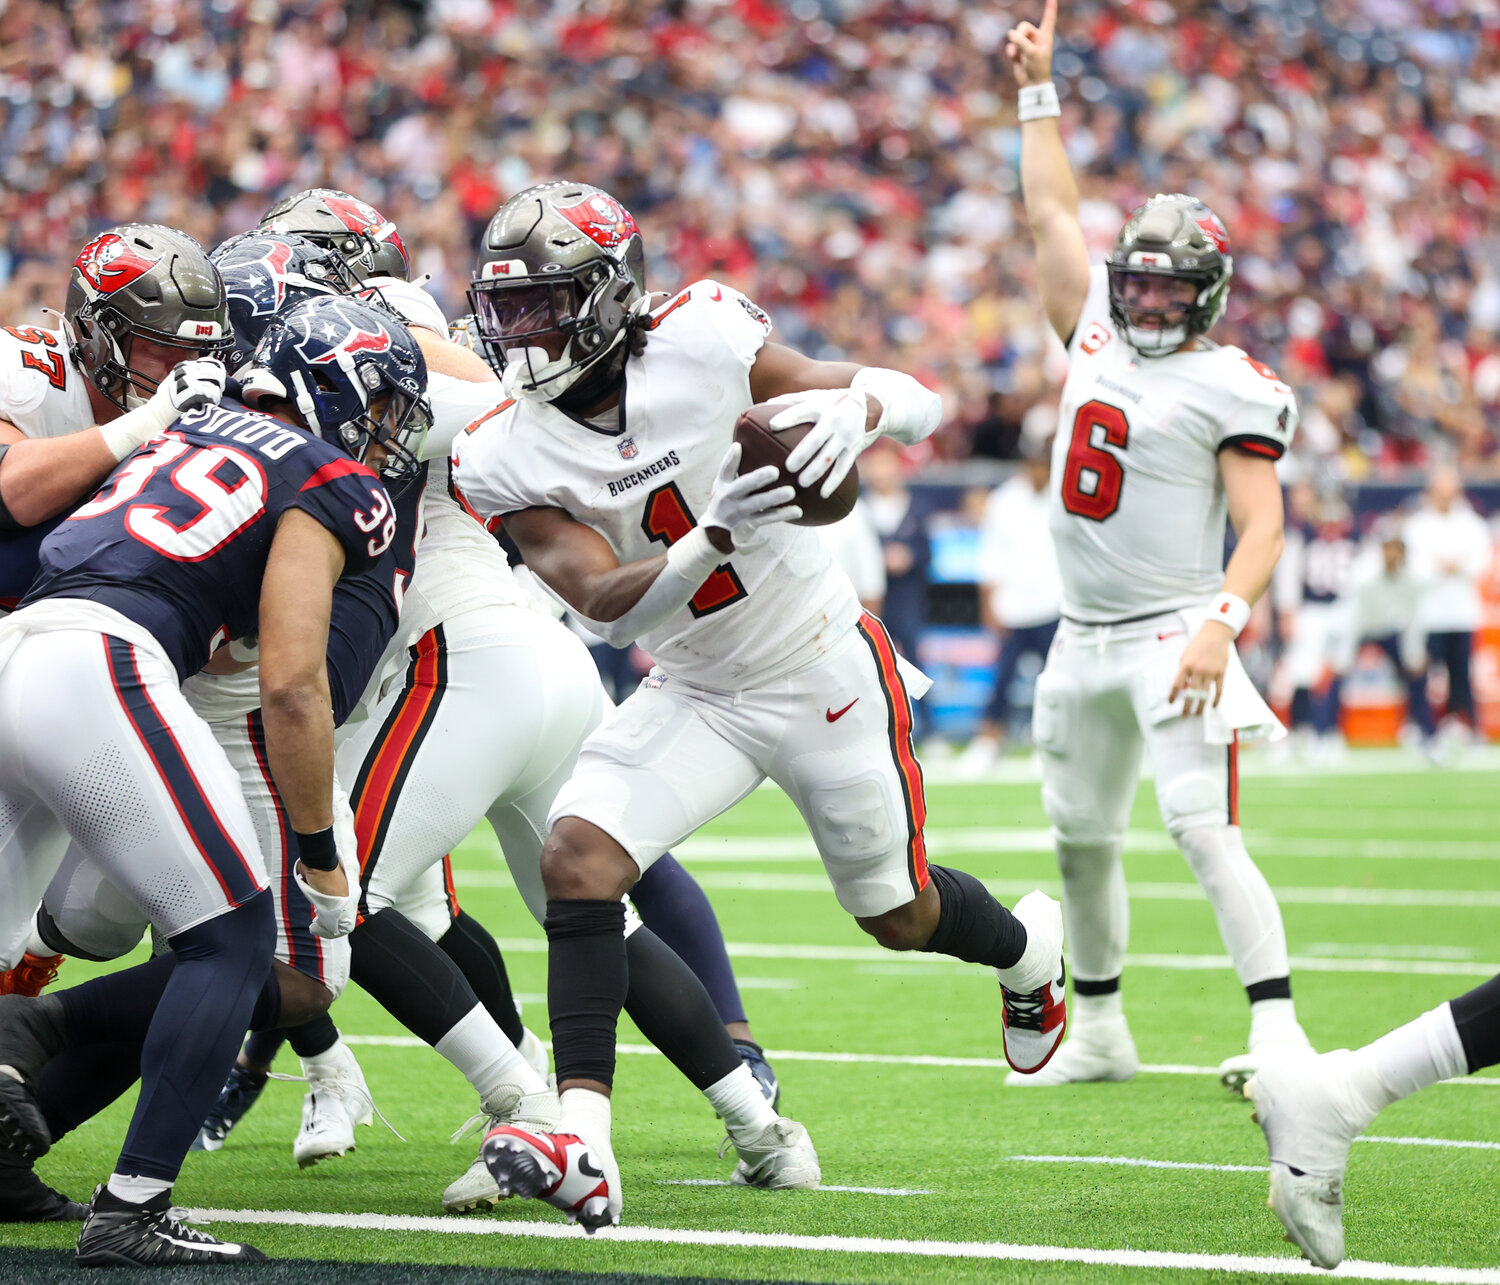 Buccaneers running back Rachaad White (1) scores on a 1-yard touchdown carry as quarterback Baker Mayfield (6) reacts in the background during an NFL game between the Houston Texans and the Tampa Bay Buccaneers on November 5, 2023 in Houston.